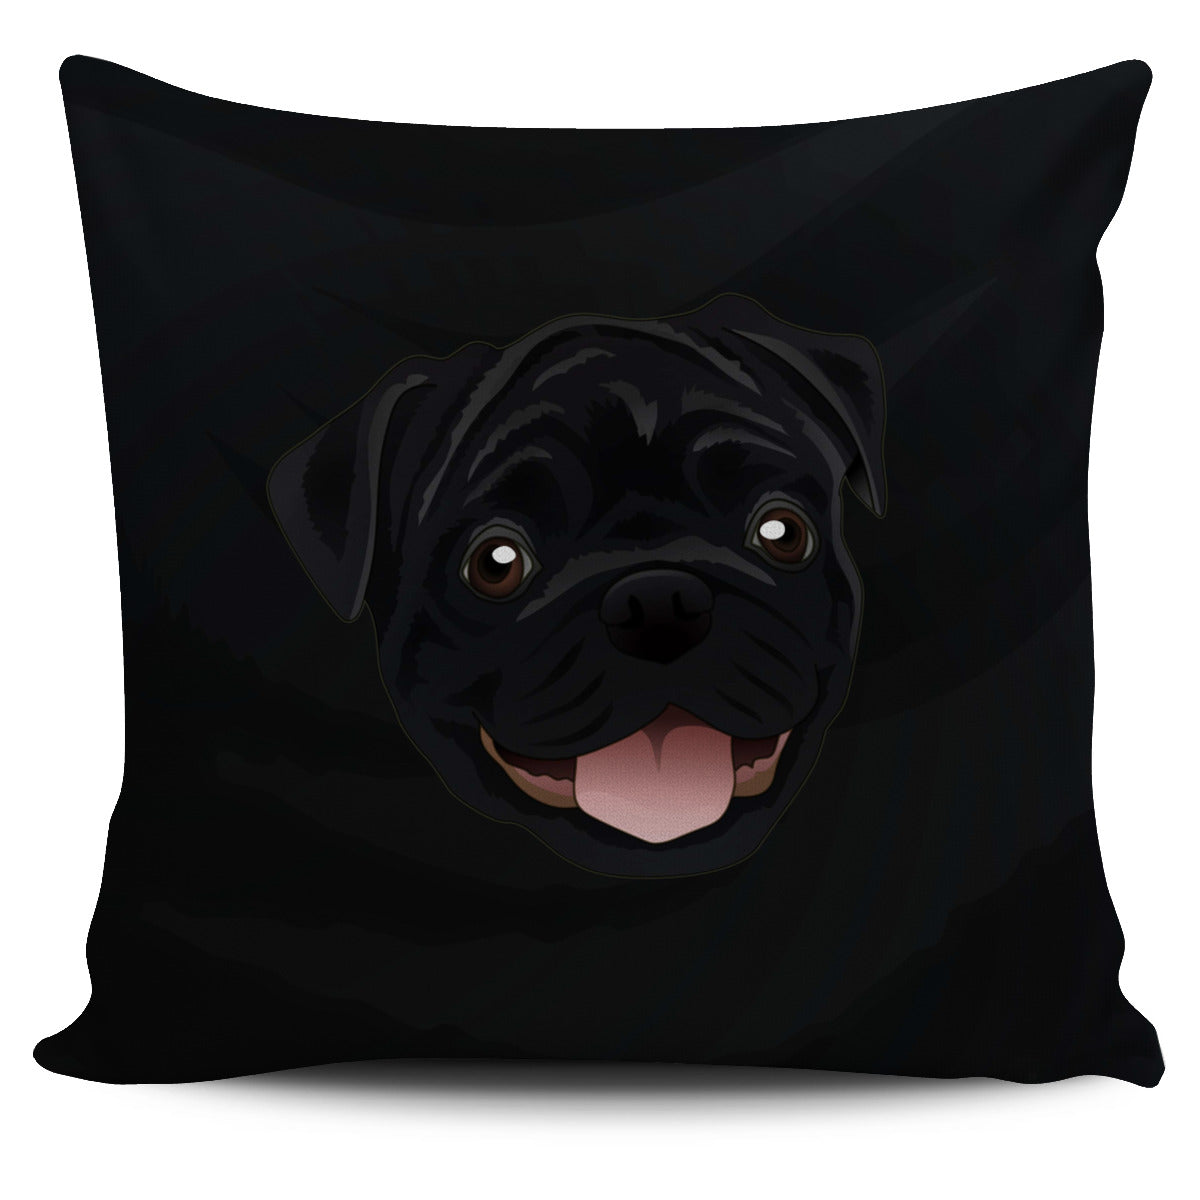 Real Black Pug Pillow Cover